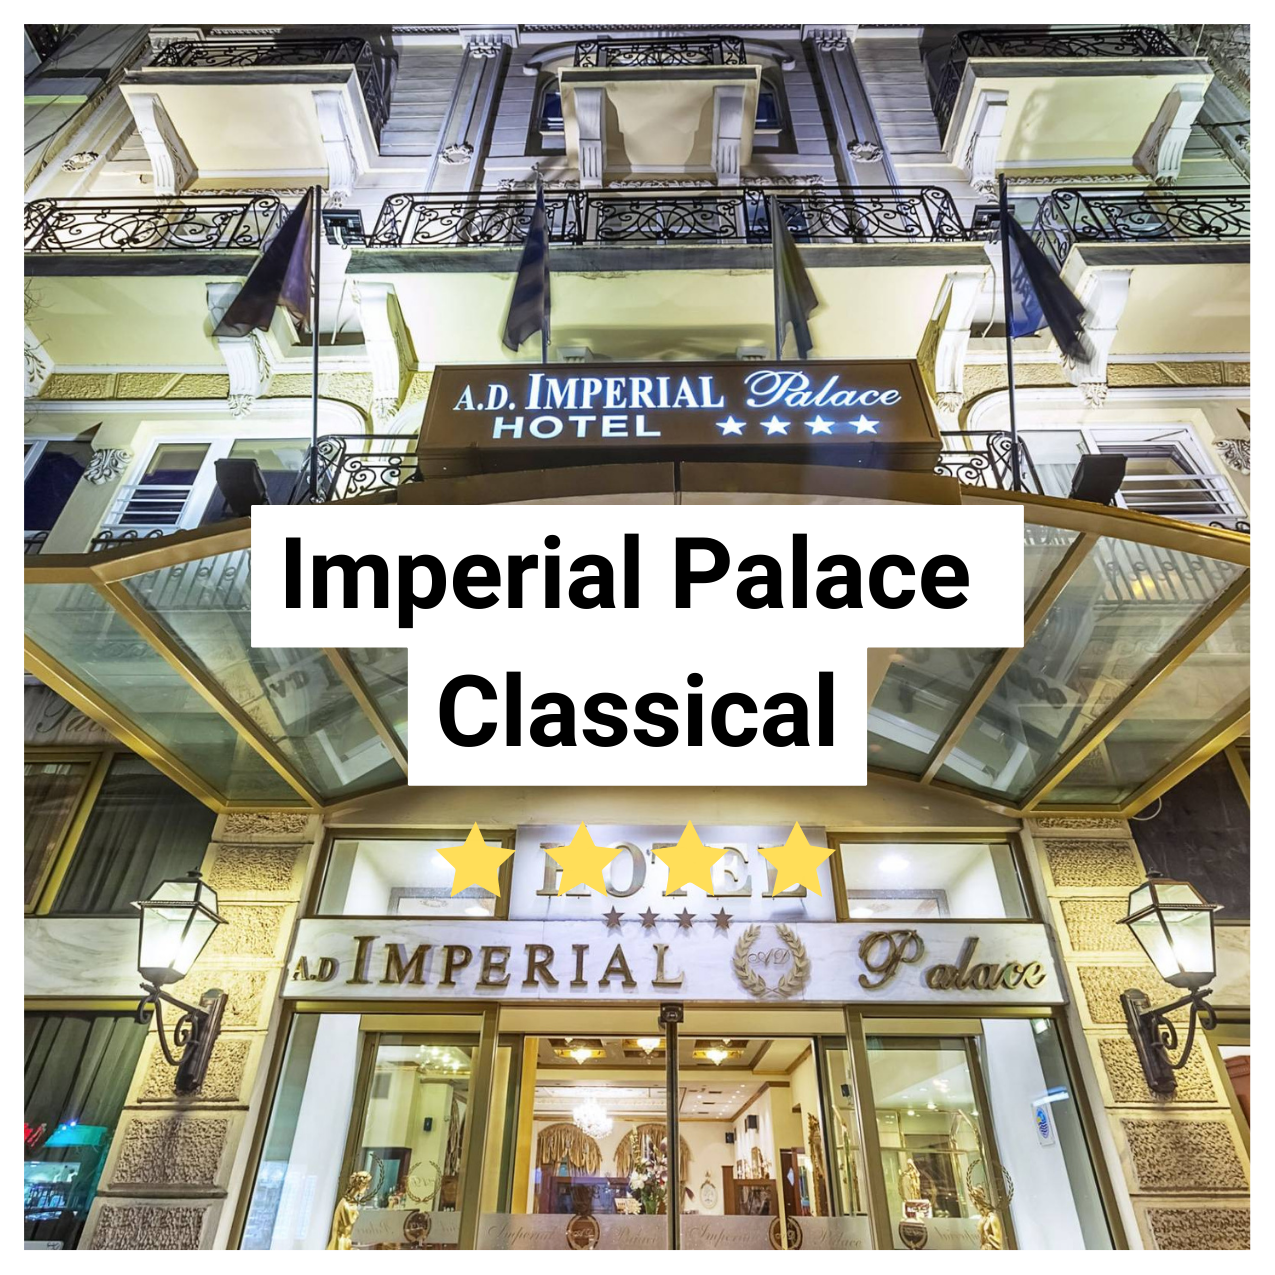 Imperial Palace Classical Hotel Image.